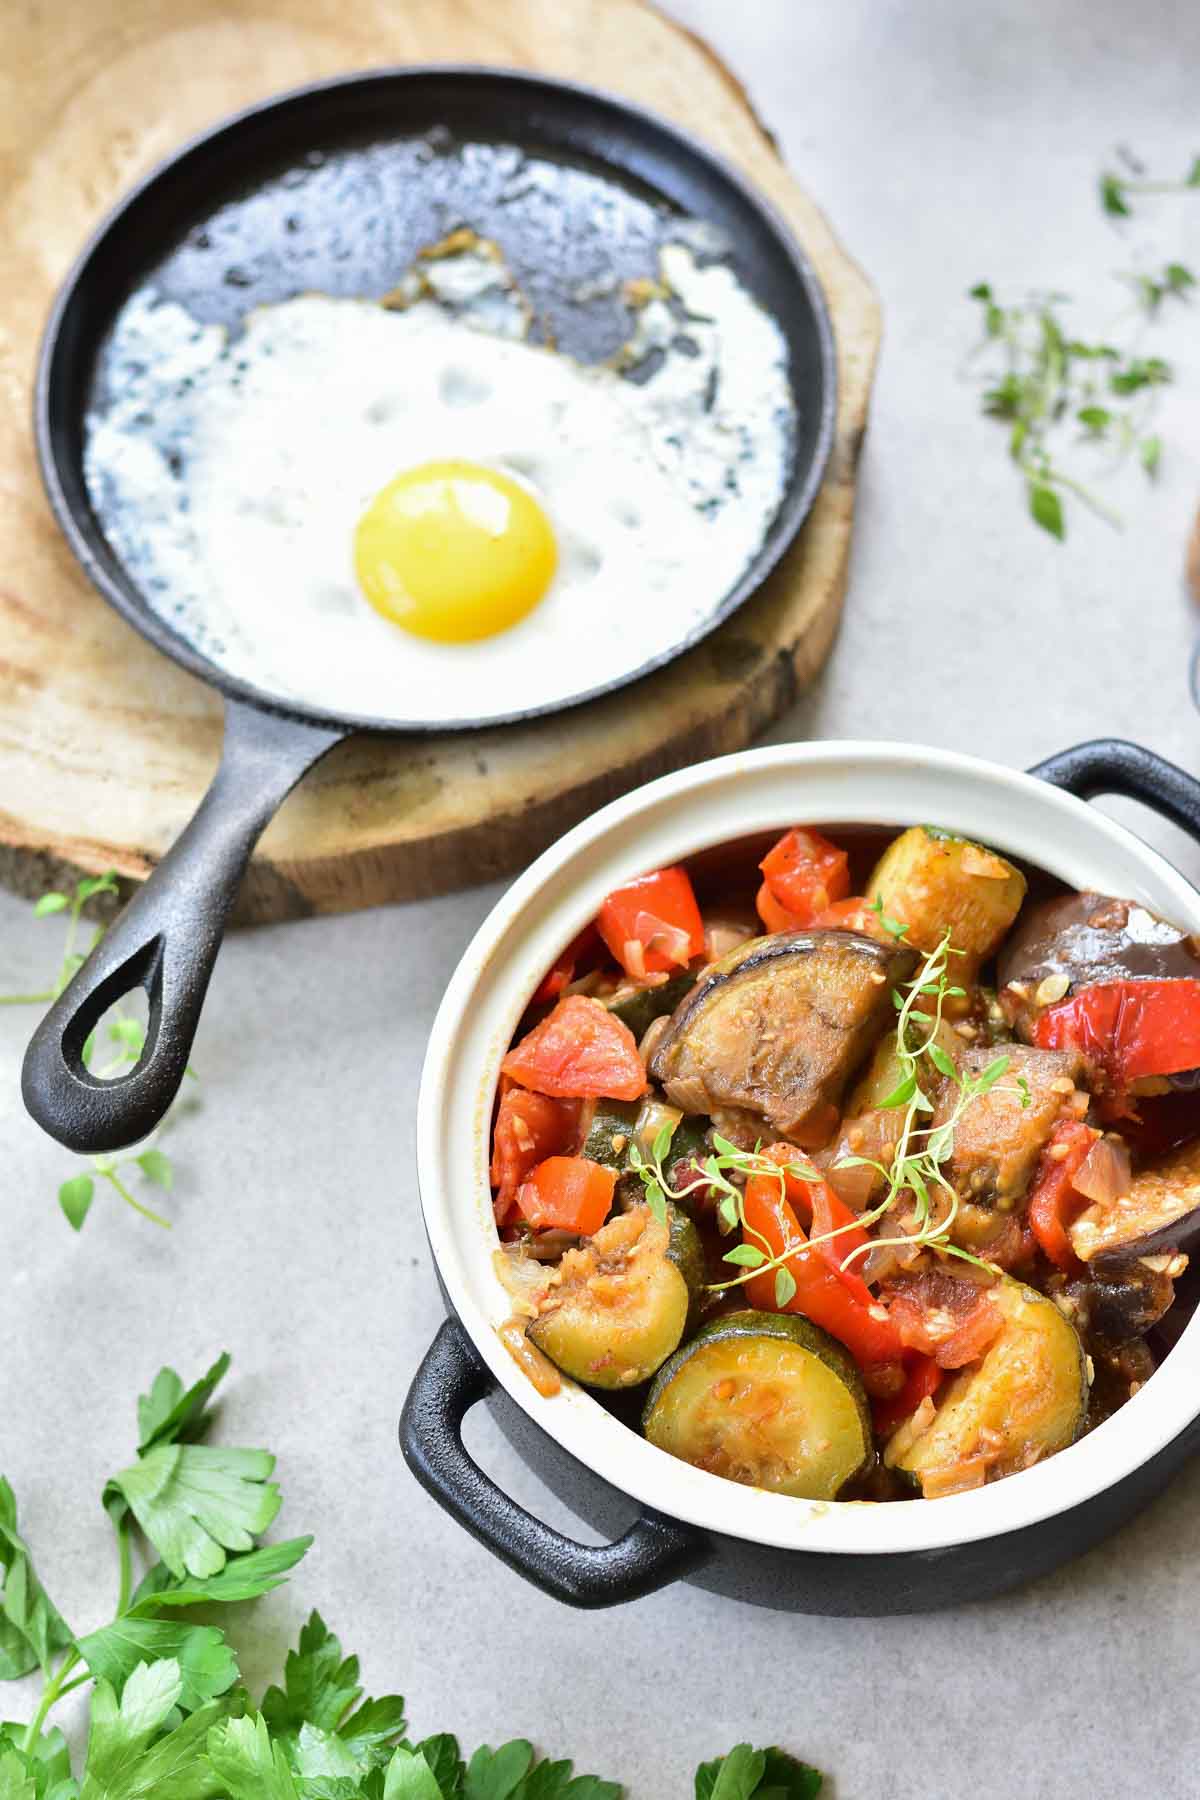 Ratatouille in a pot and a fried egg in a pan on the side.